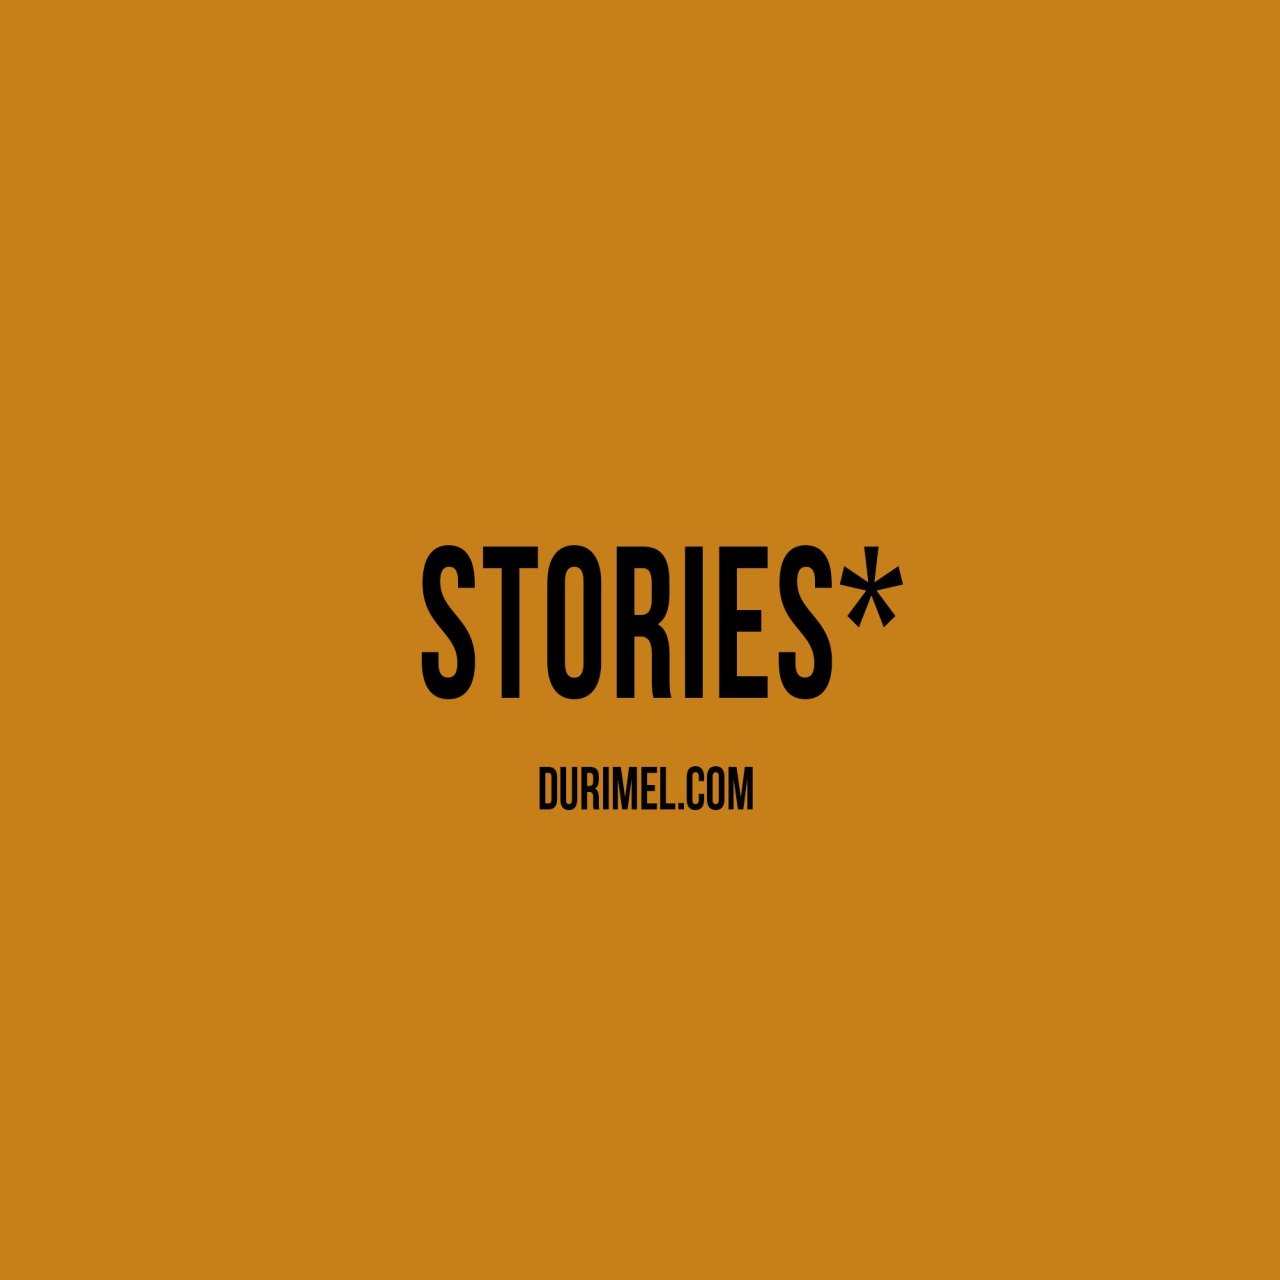 We&rsquo;re excited to introduce a new segment today. So long story short - We&rsquo;re getting a little tired of only shooting ourselves for our site so we&rsquo;re bringing new photo stories and characters to the blog. Hope you guys enjoy!  - Jalan and Jibril Durimel